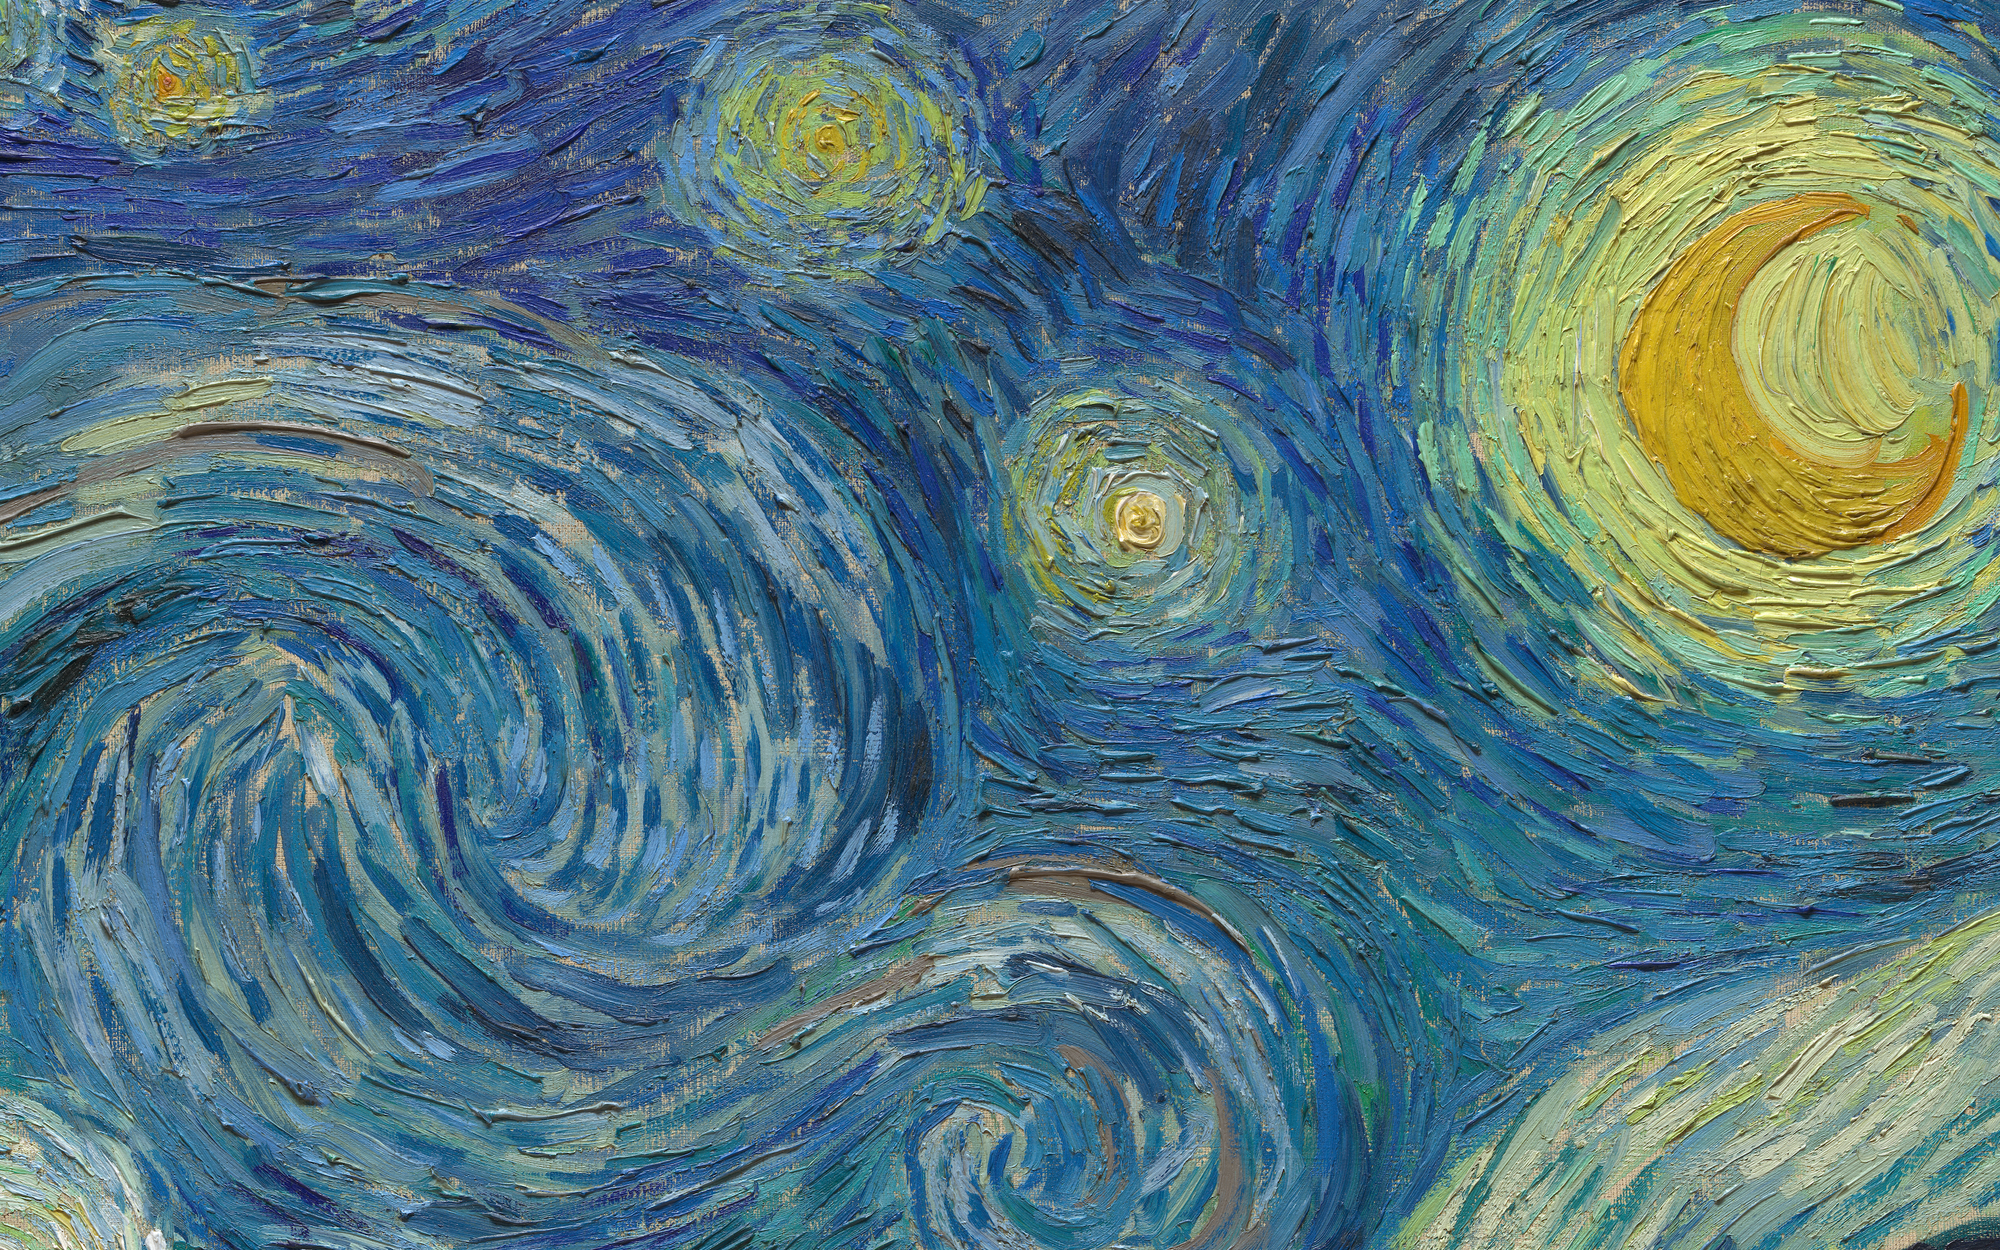 shooting starry night drawing